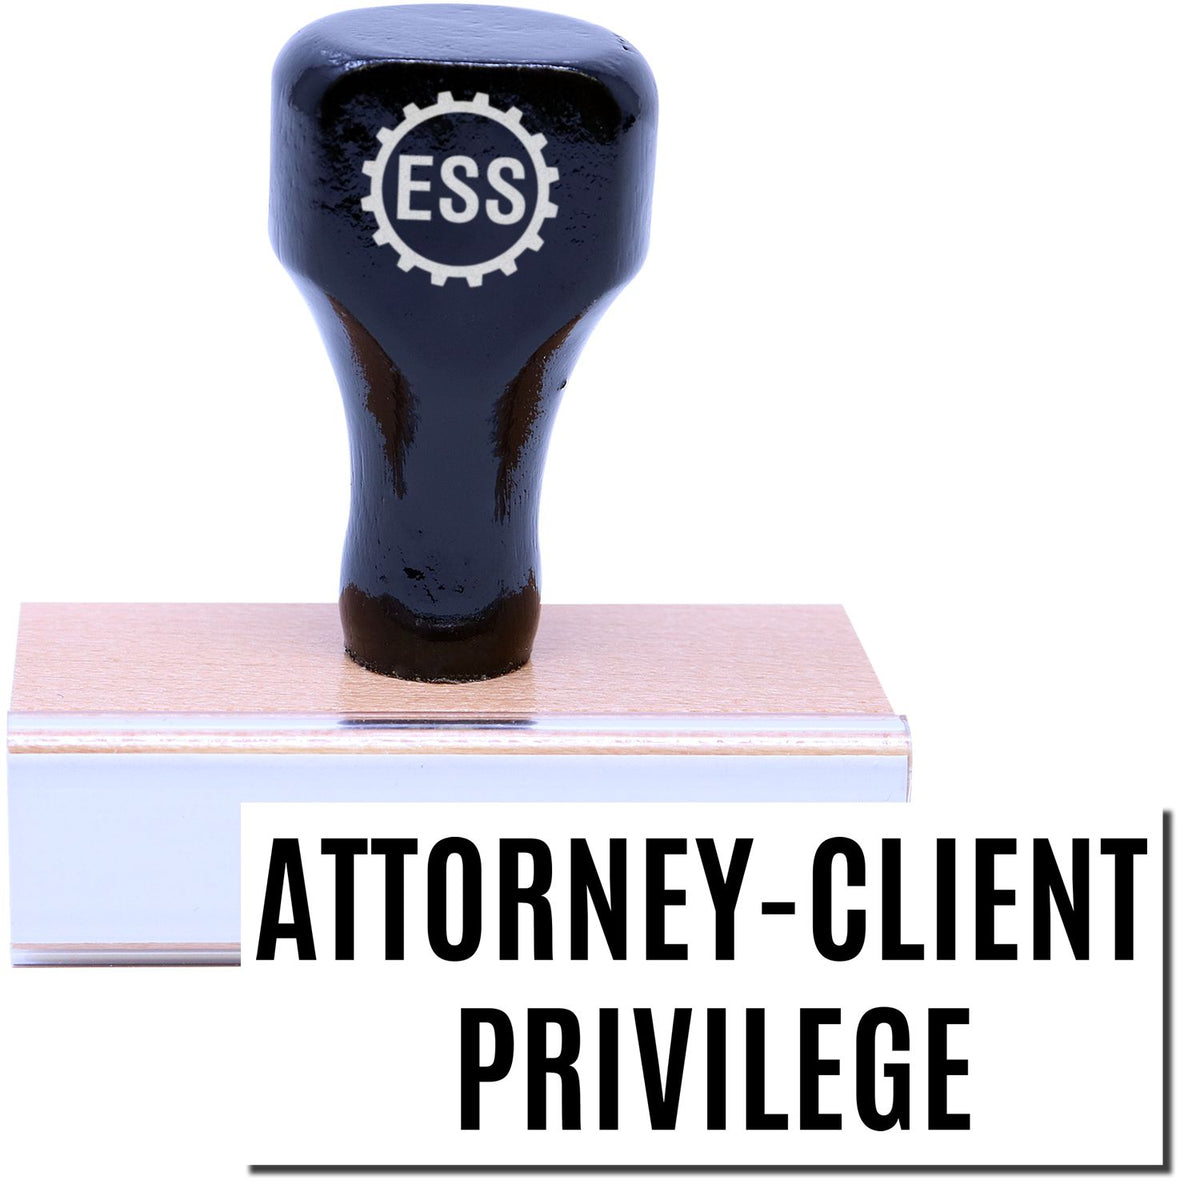 A stock office rubber stamp with a stamped image showing how the text &quot;ATTORNEY-CLIENT PRIVILEGE&quot; in a large font is displayed after stamping.